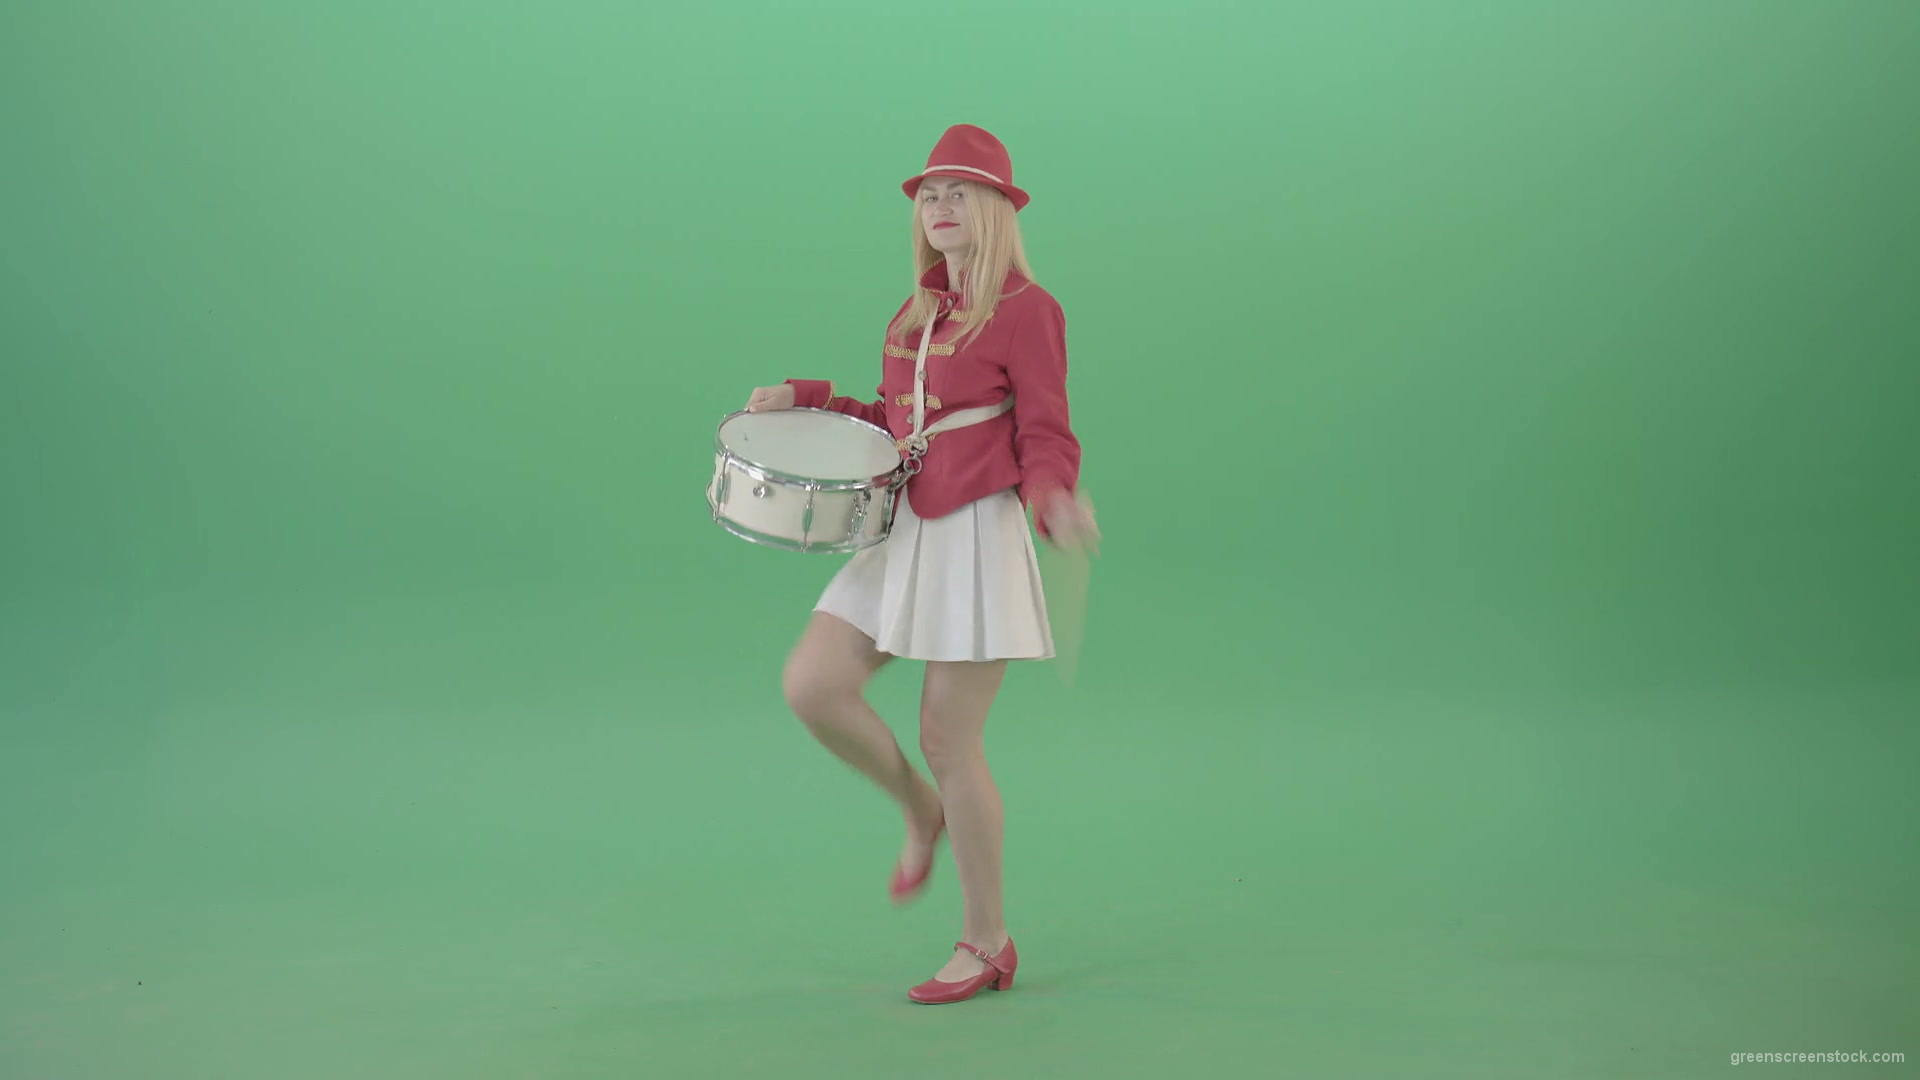 Girl-in-red-uniform-marching-and-play-snare-drum-on-green-screen-4K-Video-Footage-1920_005 Green Screen Stock